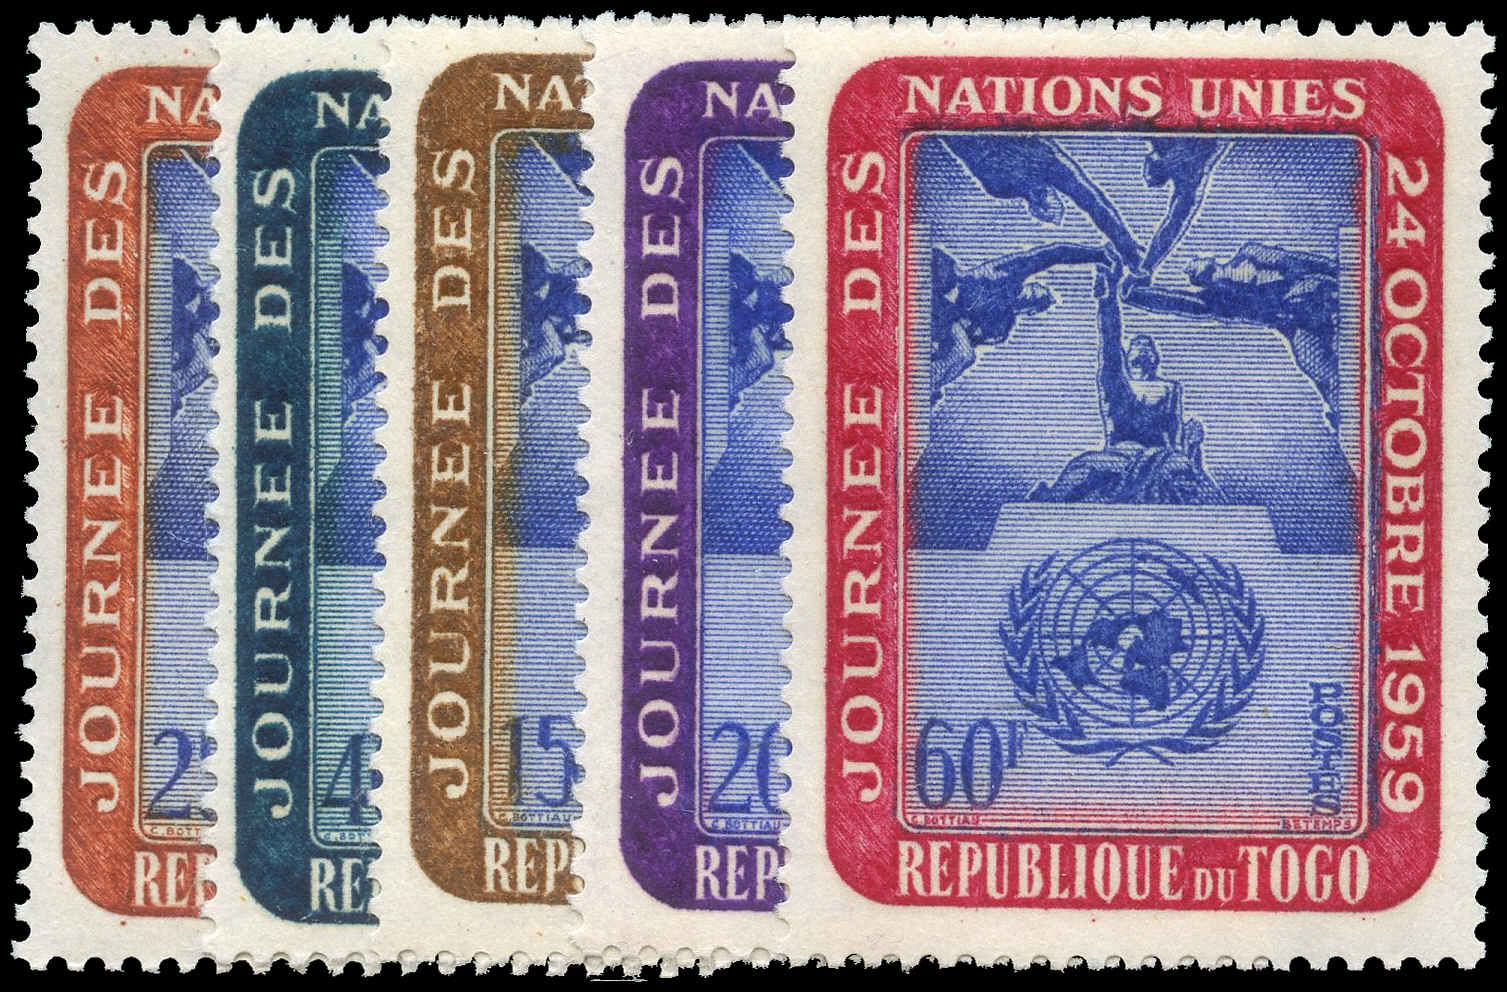 Buy TOGO #364-8 - Five Continents, Ceiling Painting, Palais des Nations,  Geneva (1959)